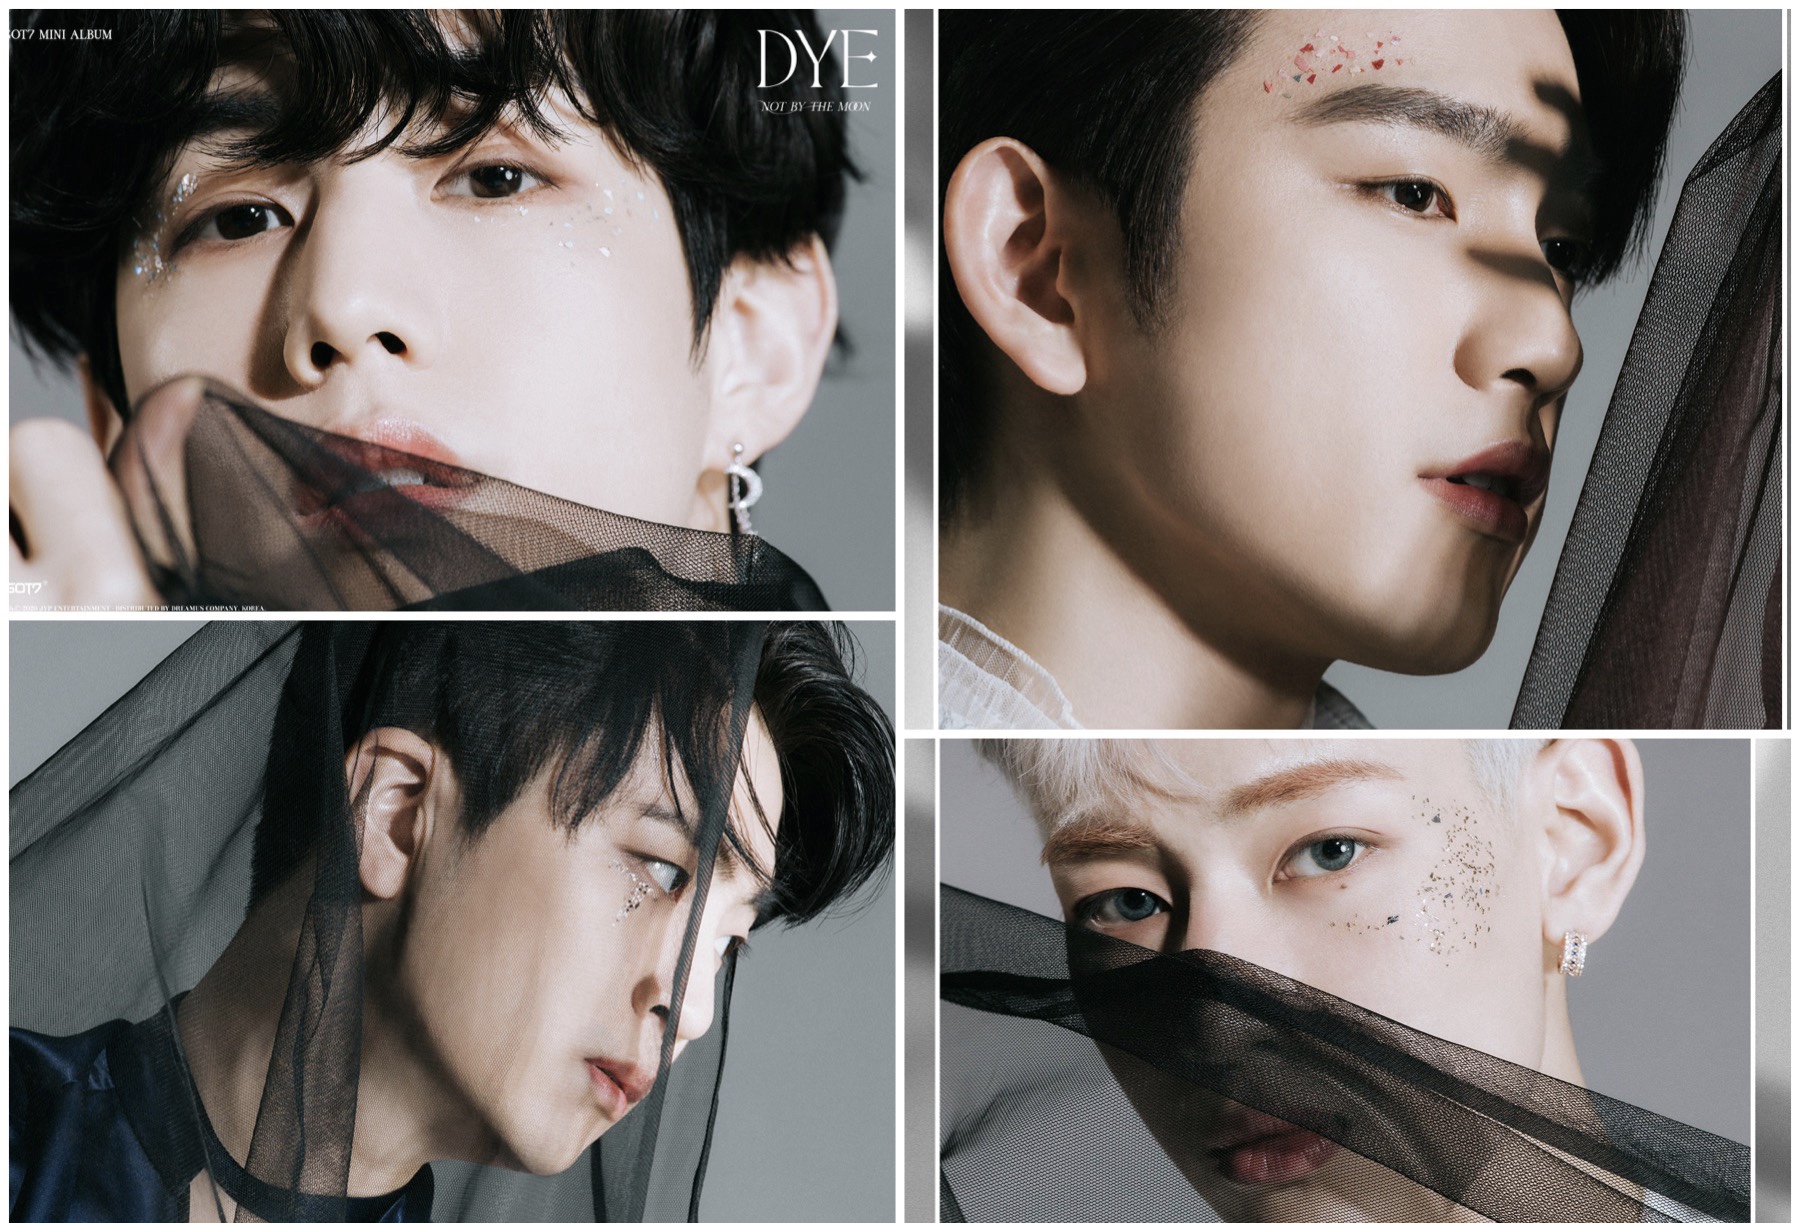 GOT7 released the fourth teaser images for comeback ‘DYE’